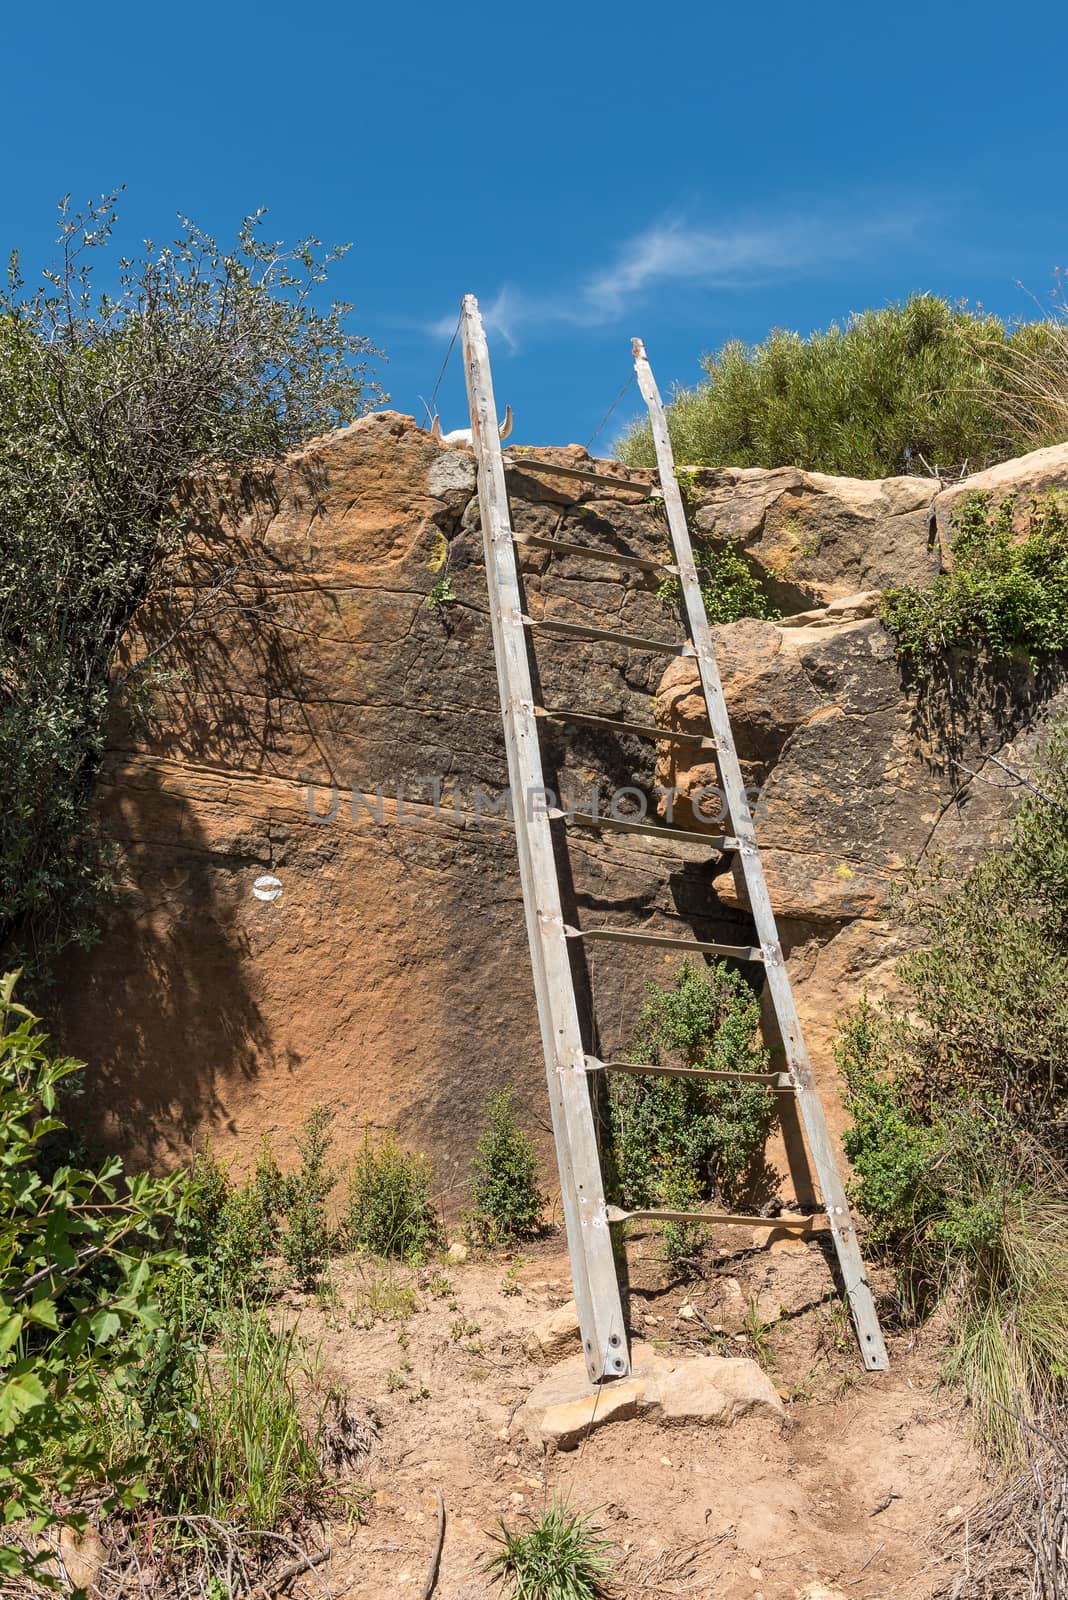 A steel ladder on the Eland Hiking Trail at Eingedi near Ladybrand. An eland spoor trail marker and a skull are visible